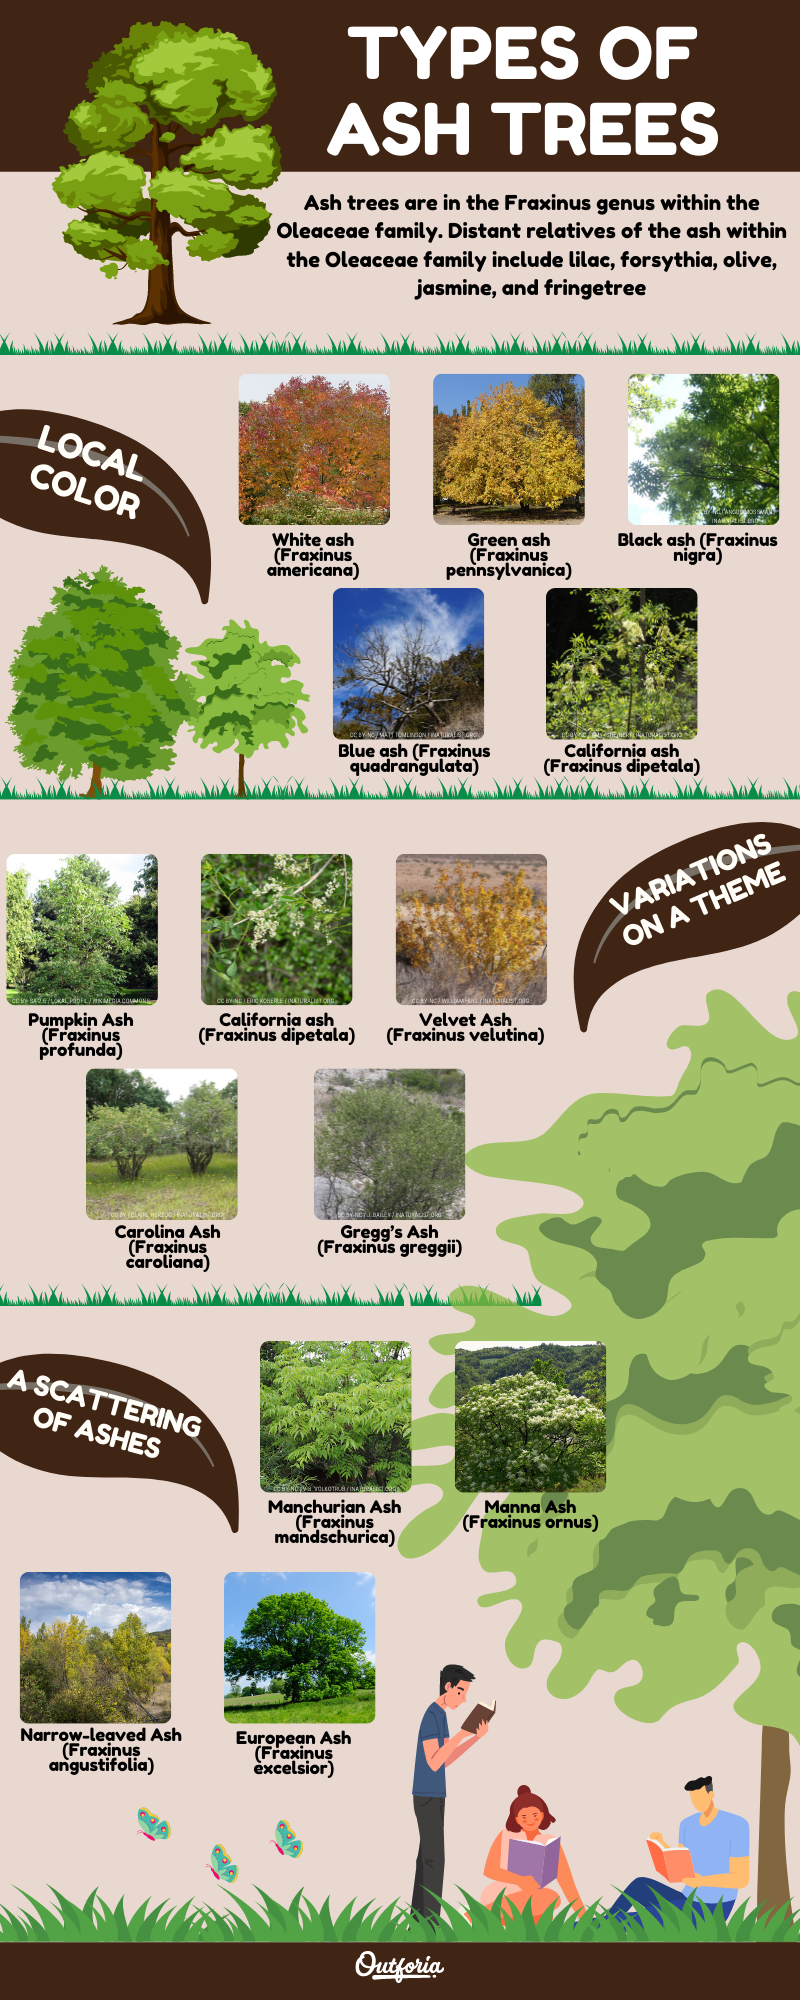 Types of ash trees infographic